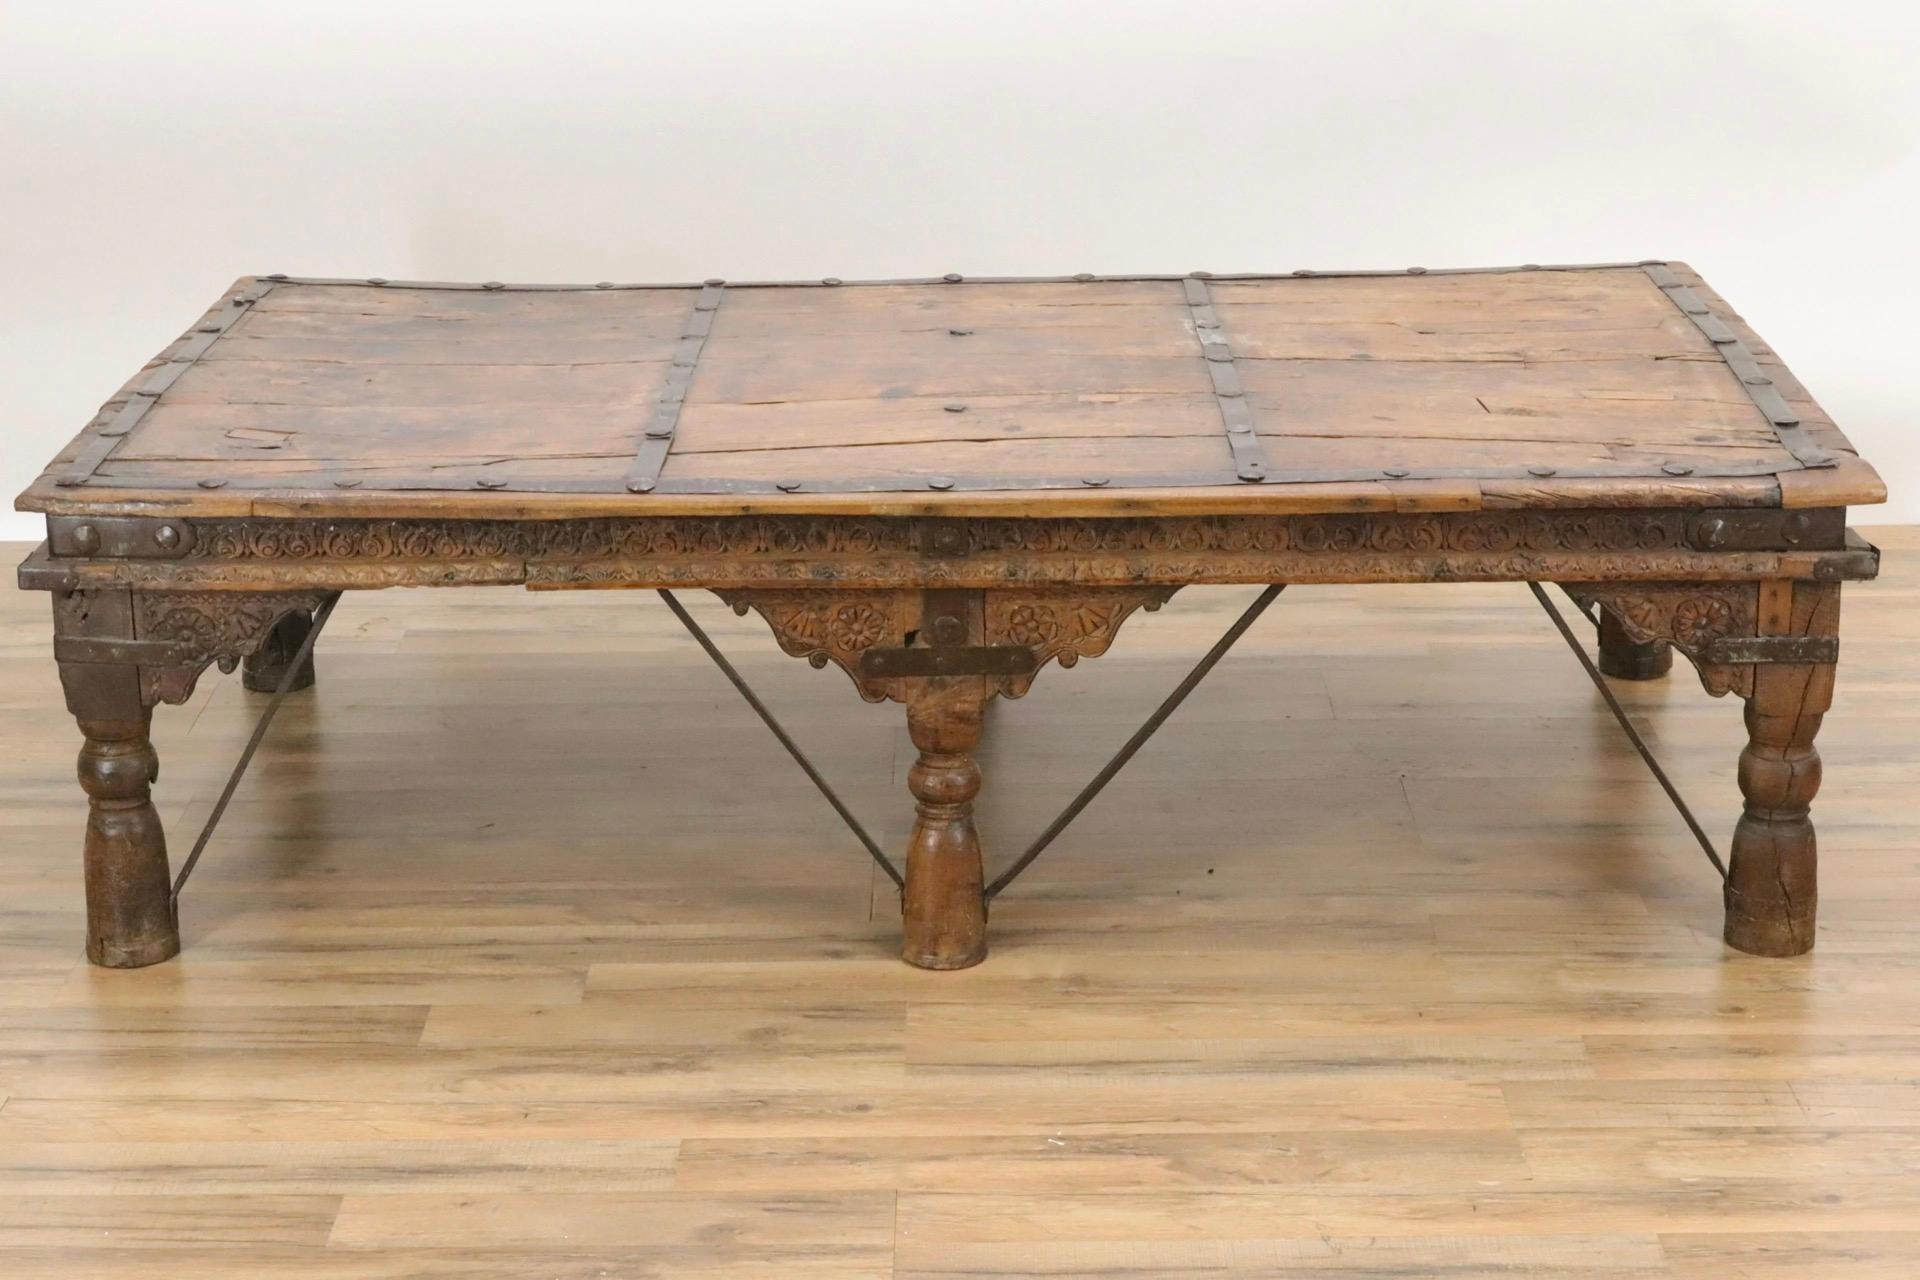 Large and impressive, this plank table top is made with unusual curved wood pieces. Table is supported by six turned legs and iron braces with intricate carved decoration on the apron. Metal strapping and iron bracing serve both as decoration and